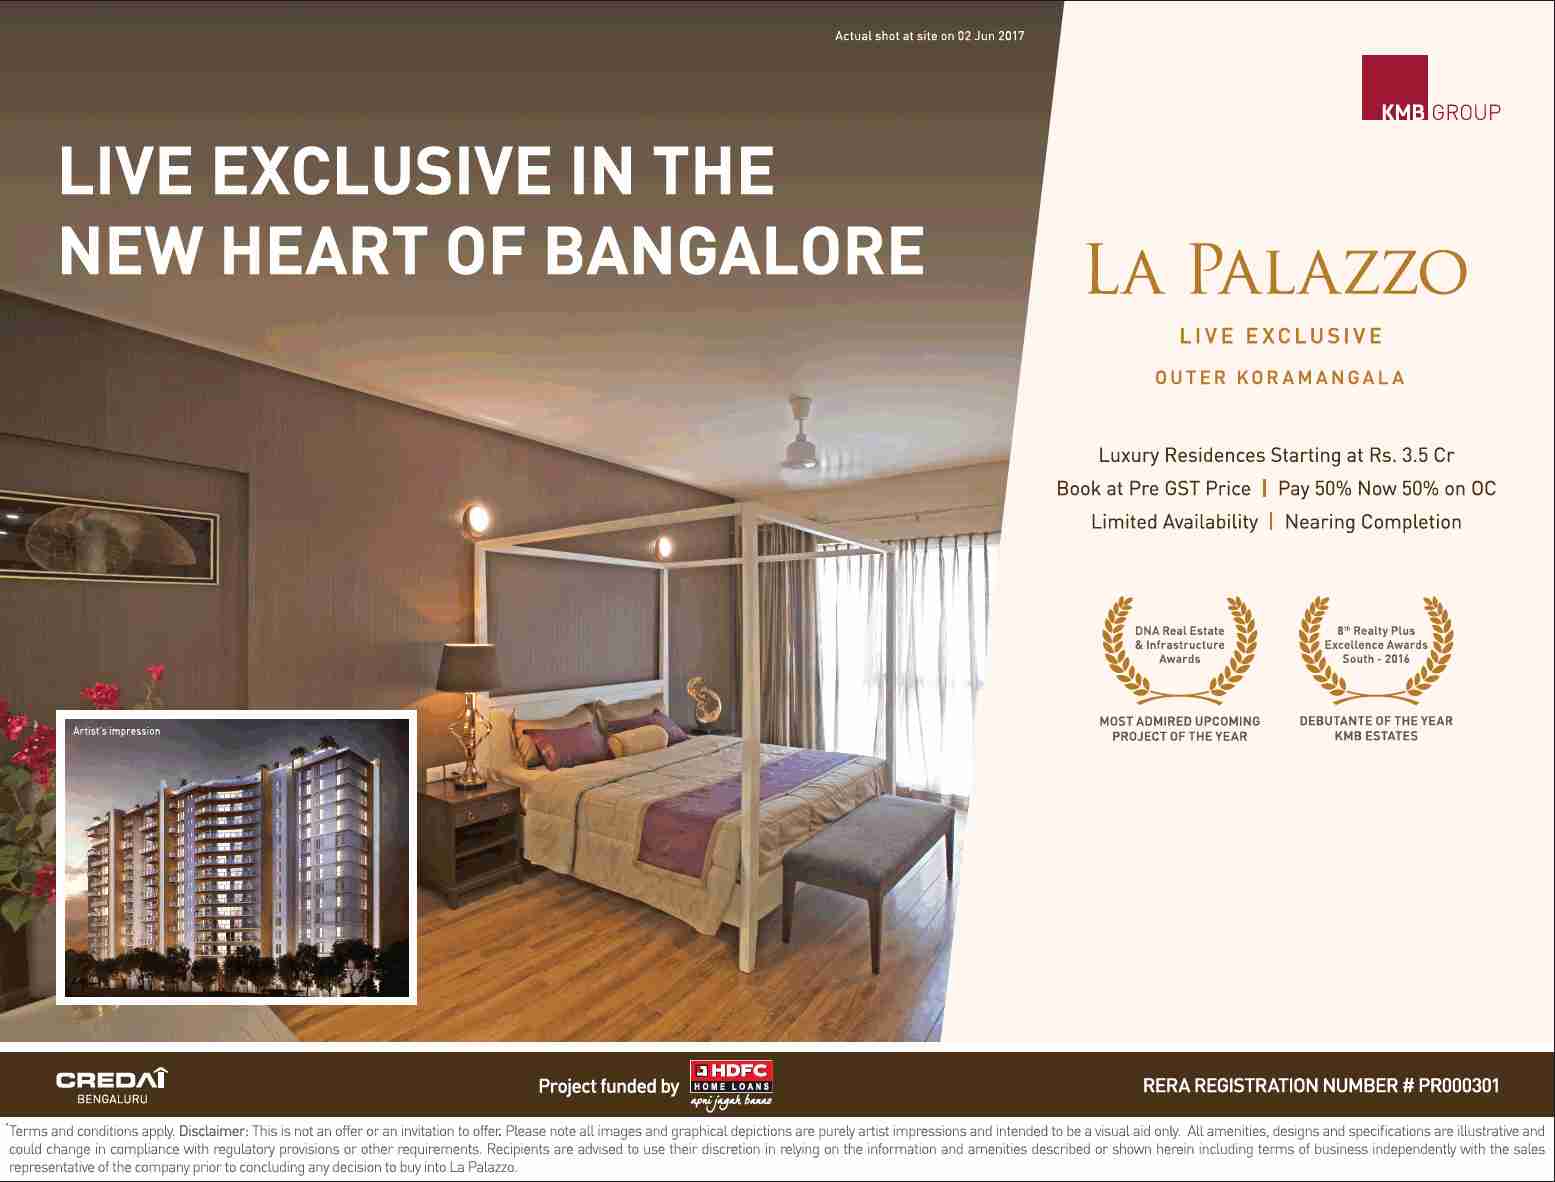 Live exclusive in the new heart of Bangalore at KMB La Palazzo